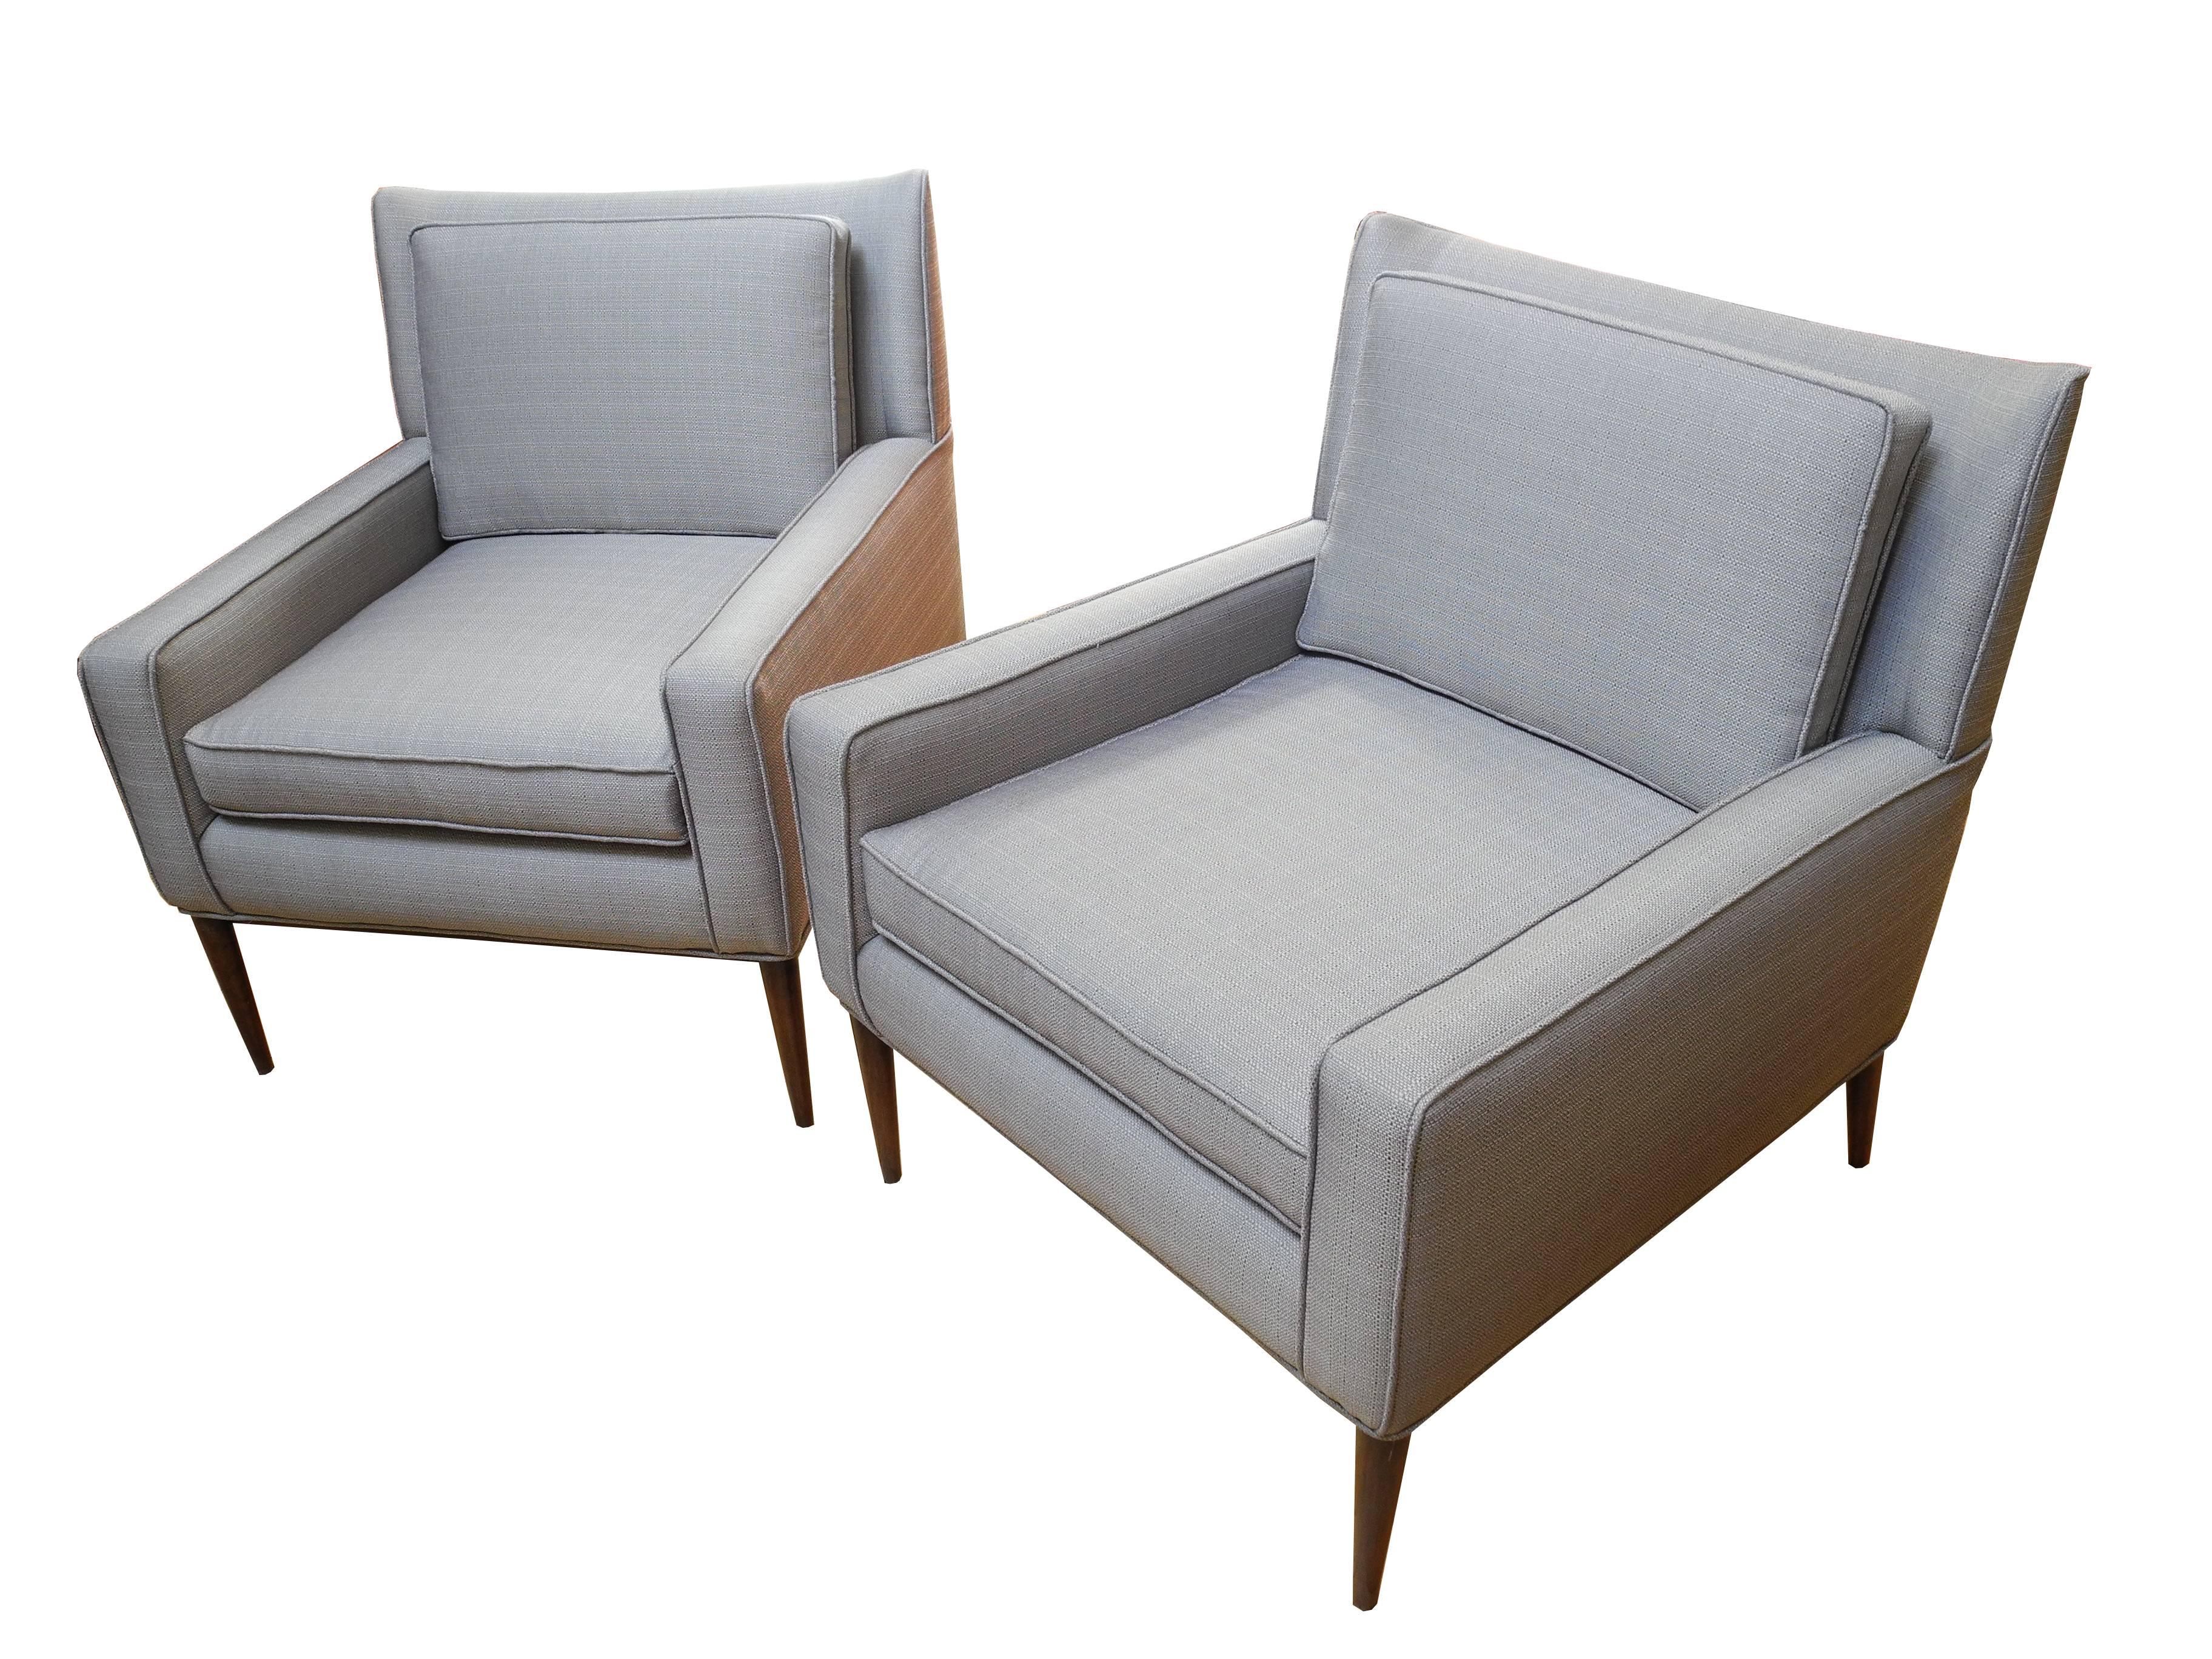 These elegantly upholstered modern lounge chairs were designed by Paul McCobb.
 